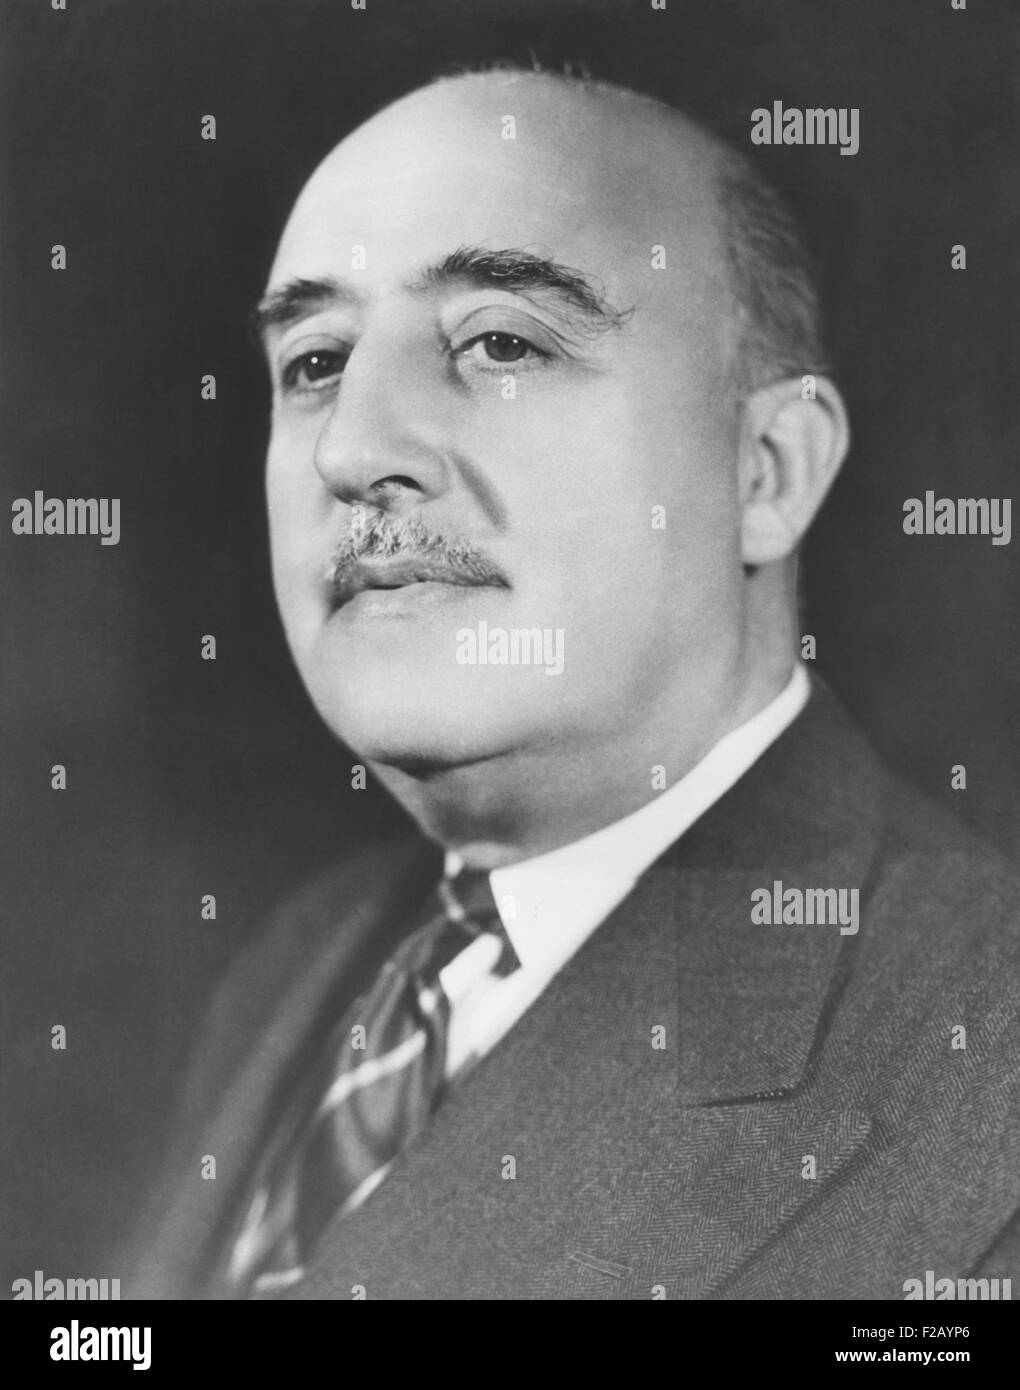 Generalissimo Francisco Franco, the Caudillo of Spain in 1952. After WW2, Spain's fascist government was internationally isolated. Franco used the Cold War tensions to renew relations with the US in the 1953 Pact of Madrid. UN membership followed in 1955. (CSU 2015 9 709) Stock Photo